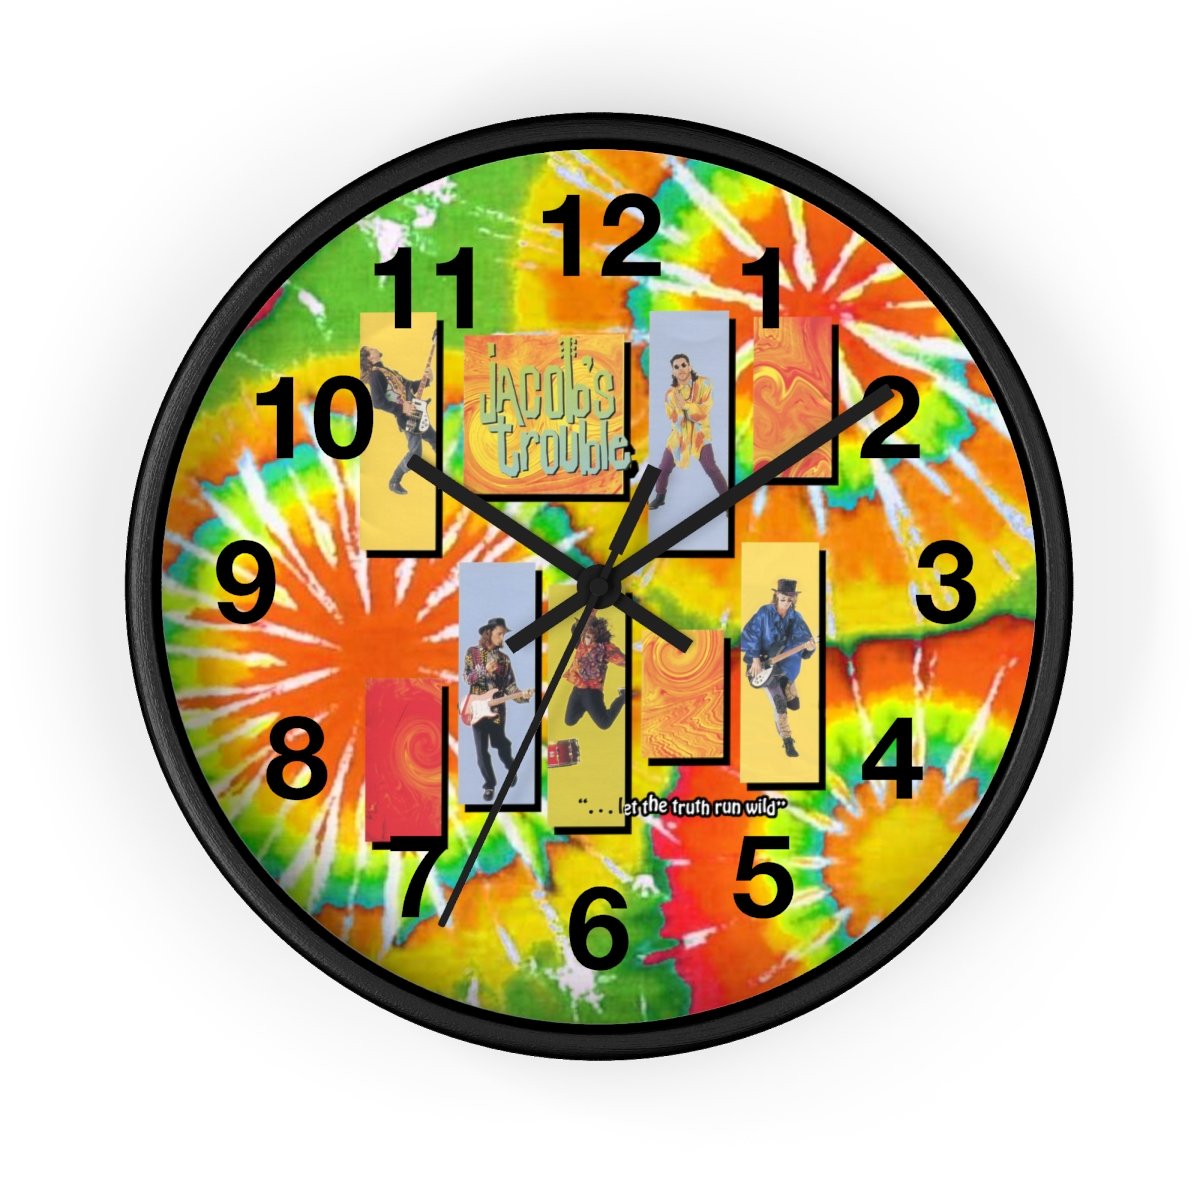 Jacob’s Trouble – “let the truth run wild” Wall clock